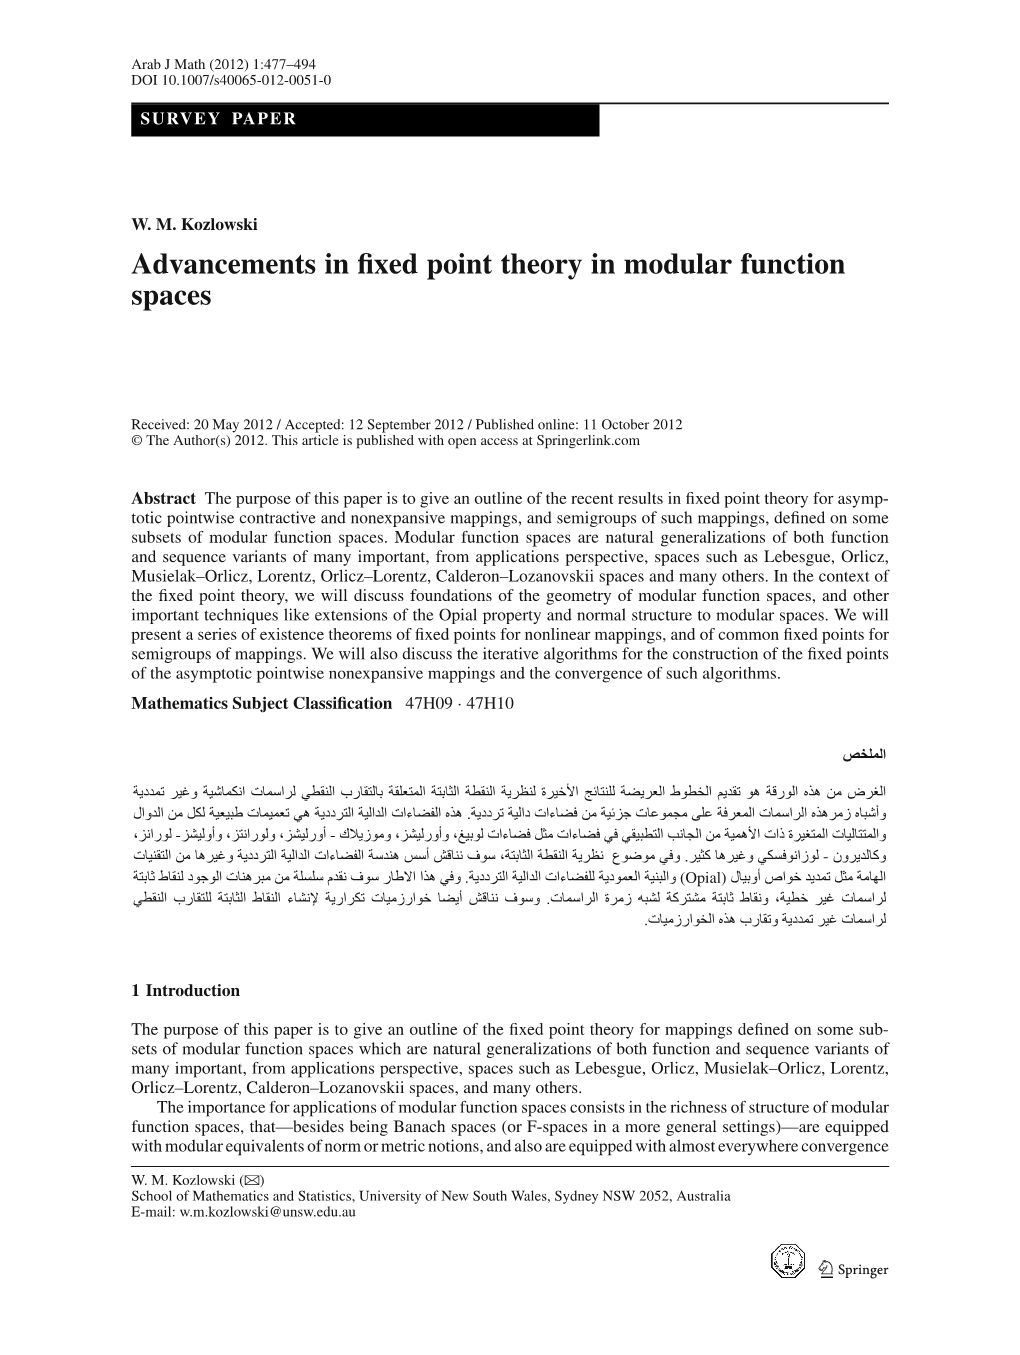 Advancements in Fixed Point Theory in Modular Function Spaces